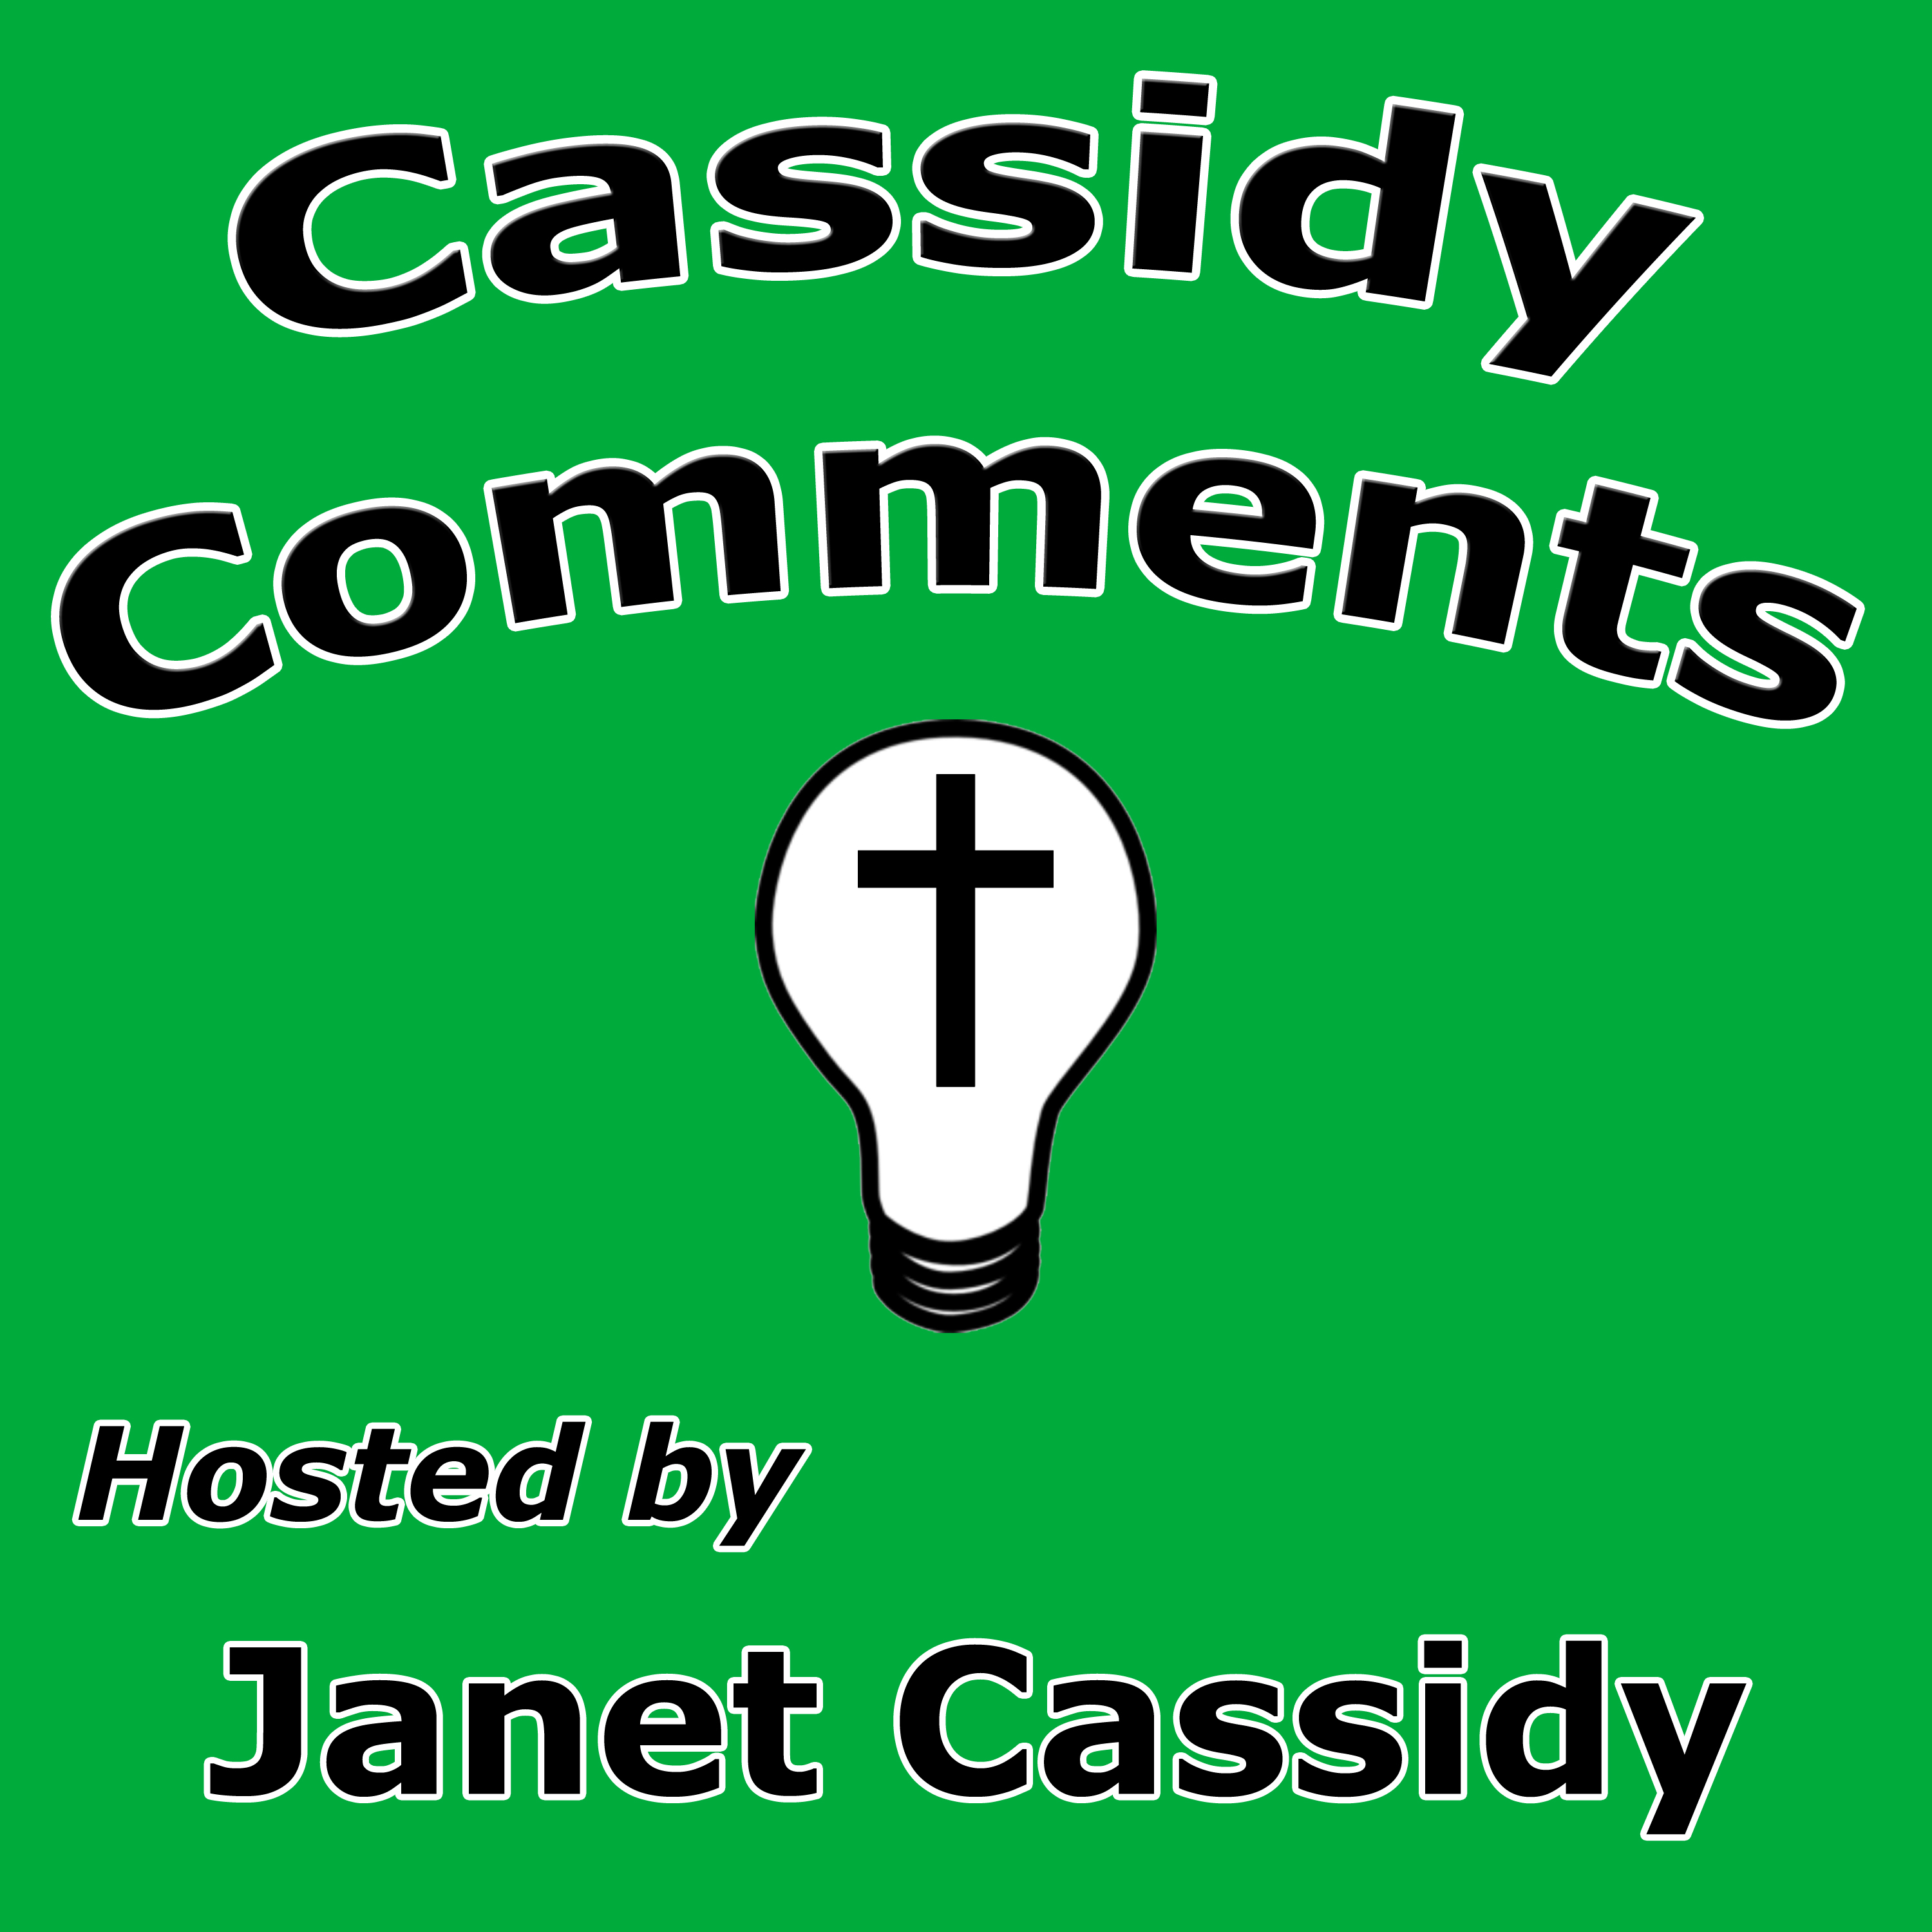 Cassidy Comments